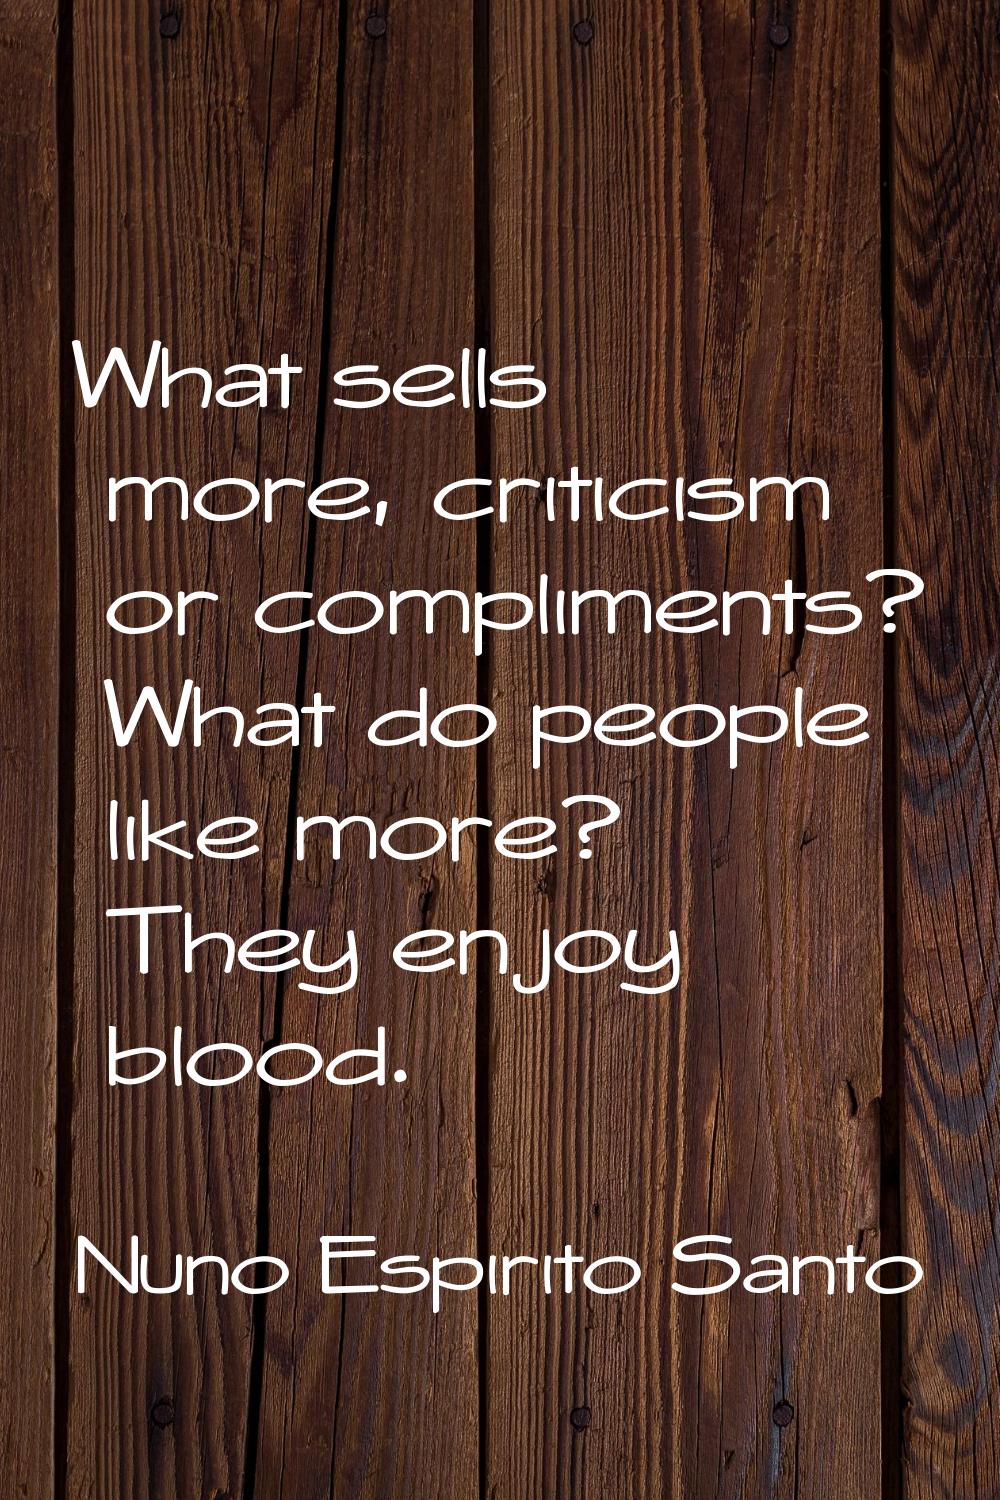 What sells more, criticism or compliments? What do people like more? They enjoy blood.